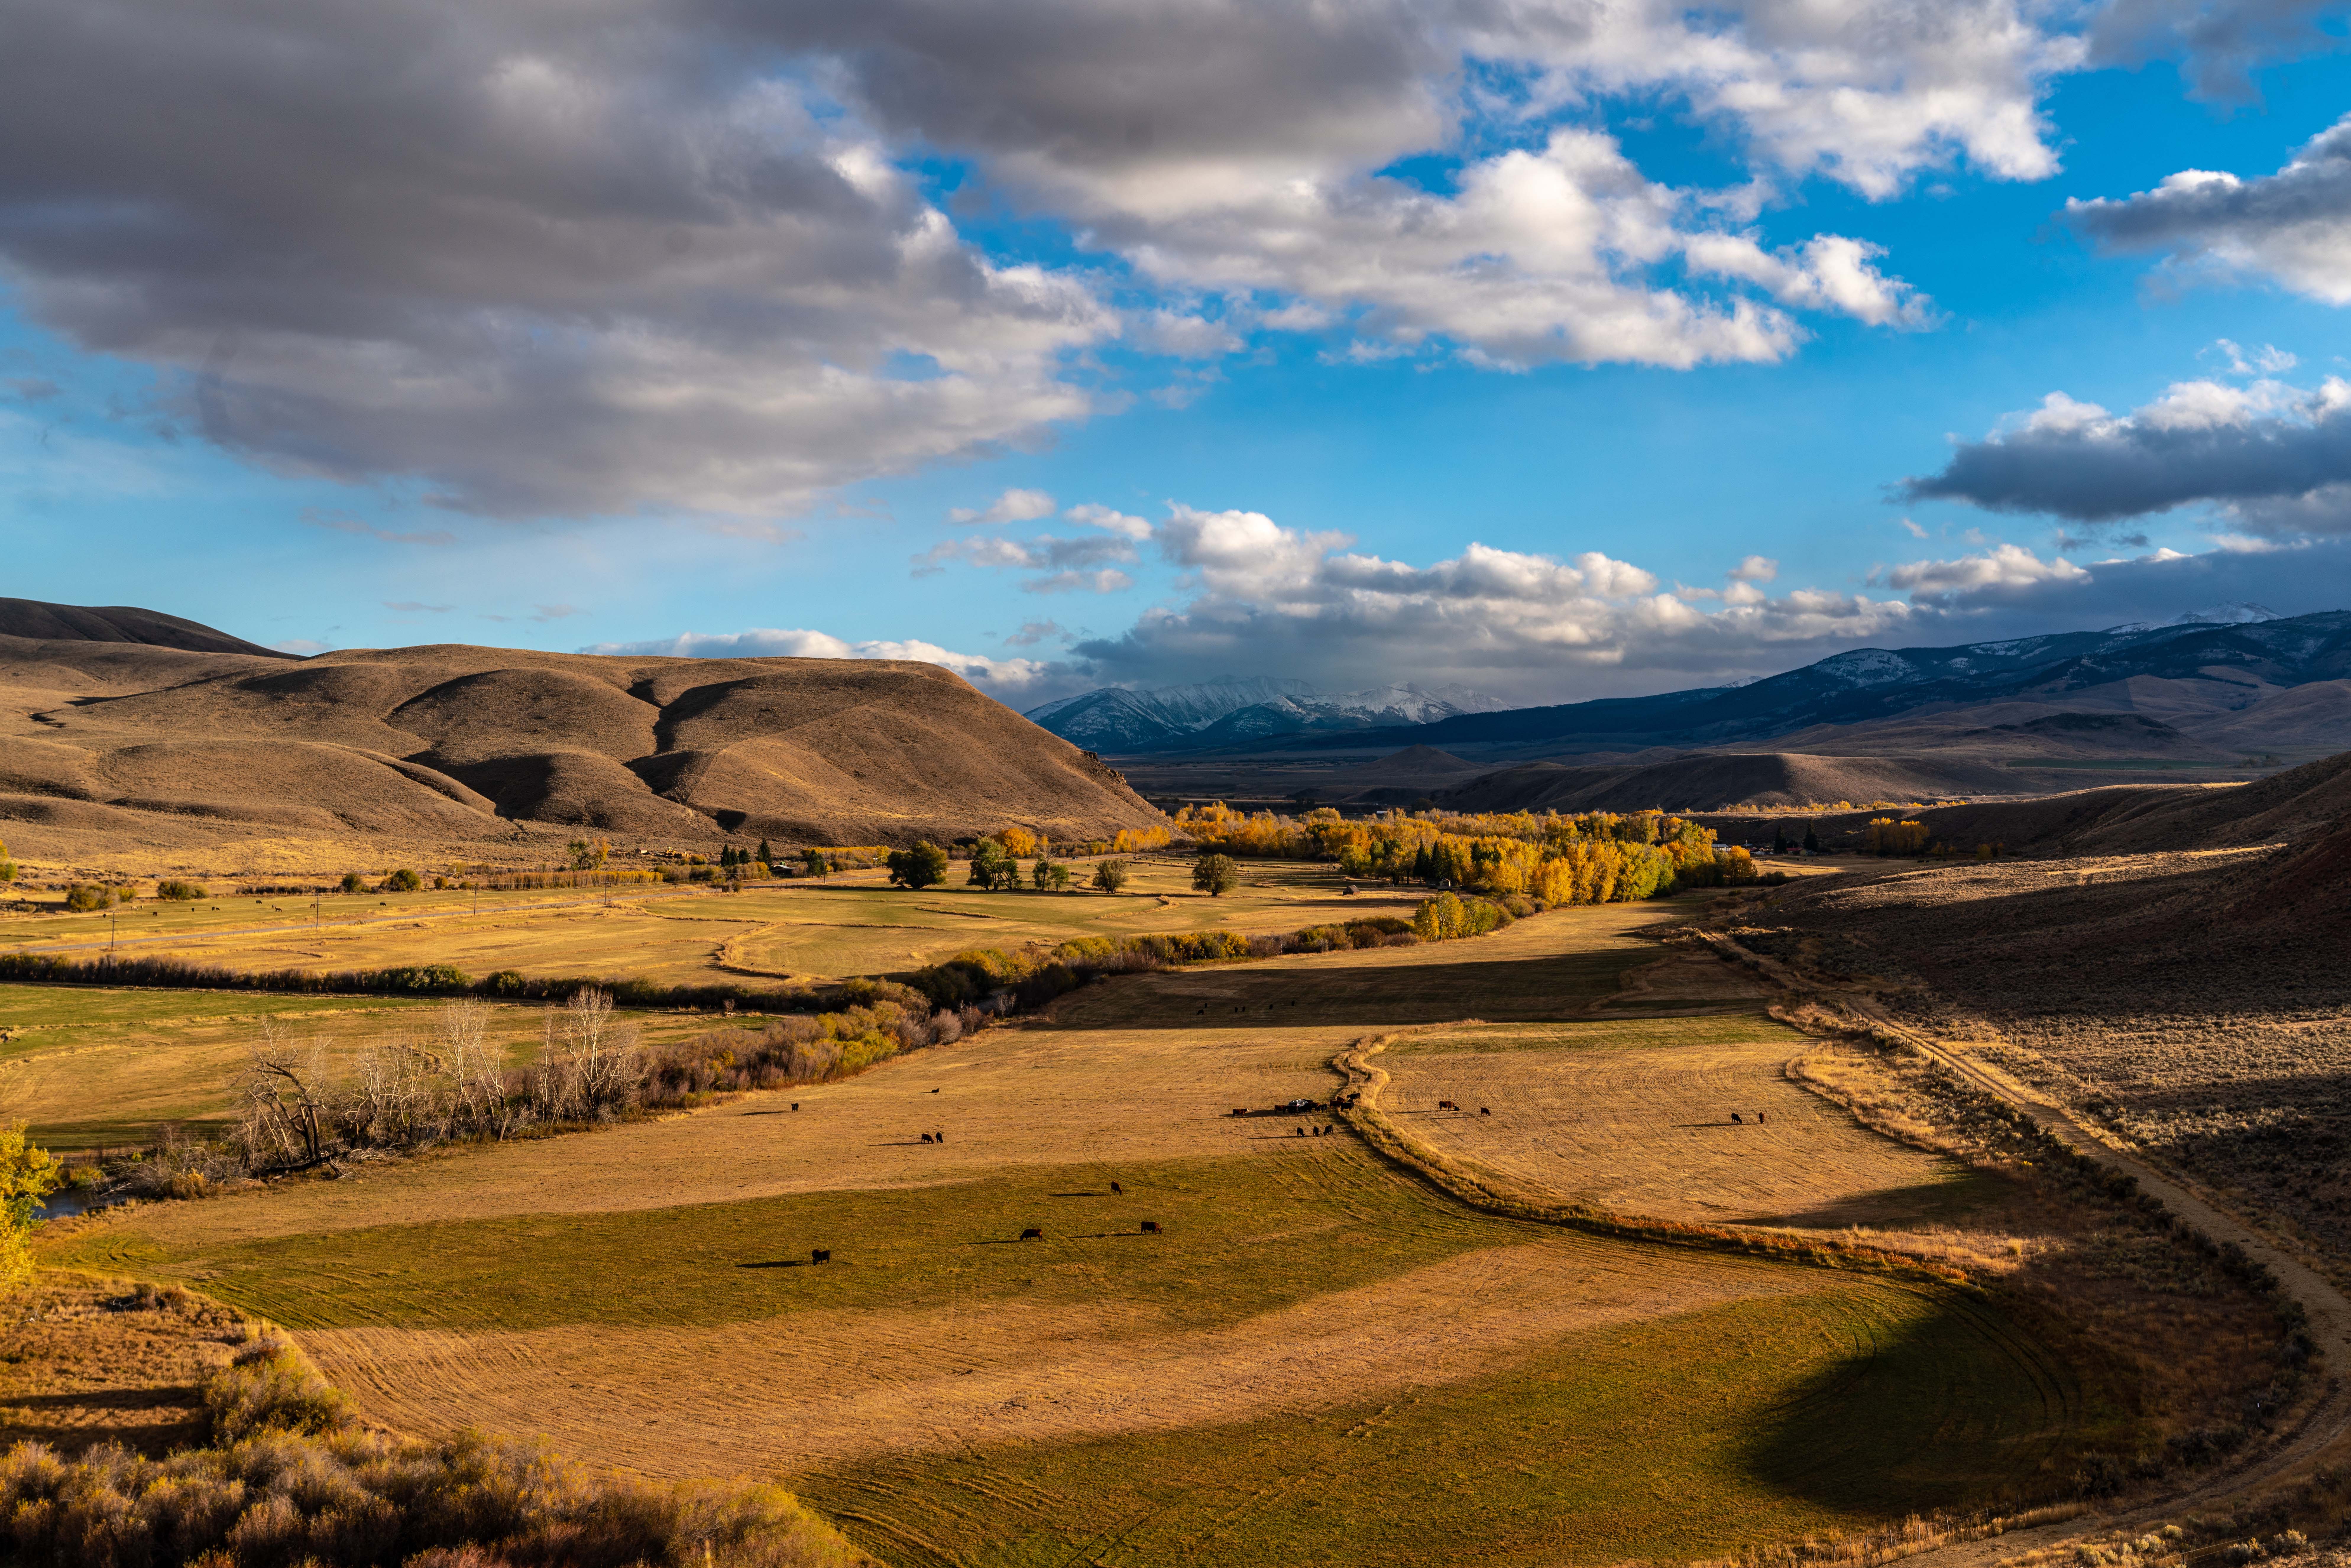 An expansive valley stretches before snowy mountains.